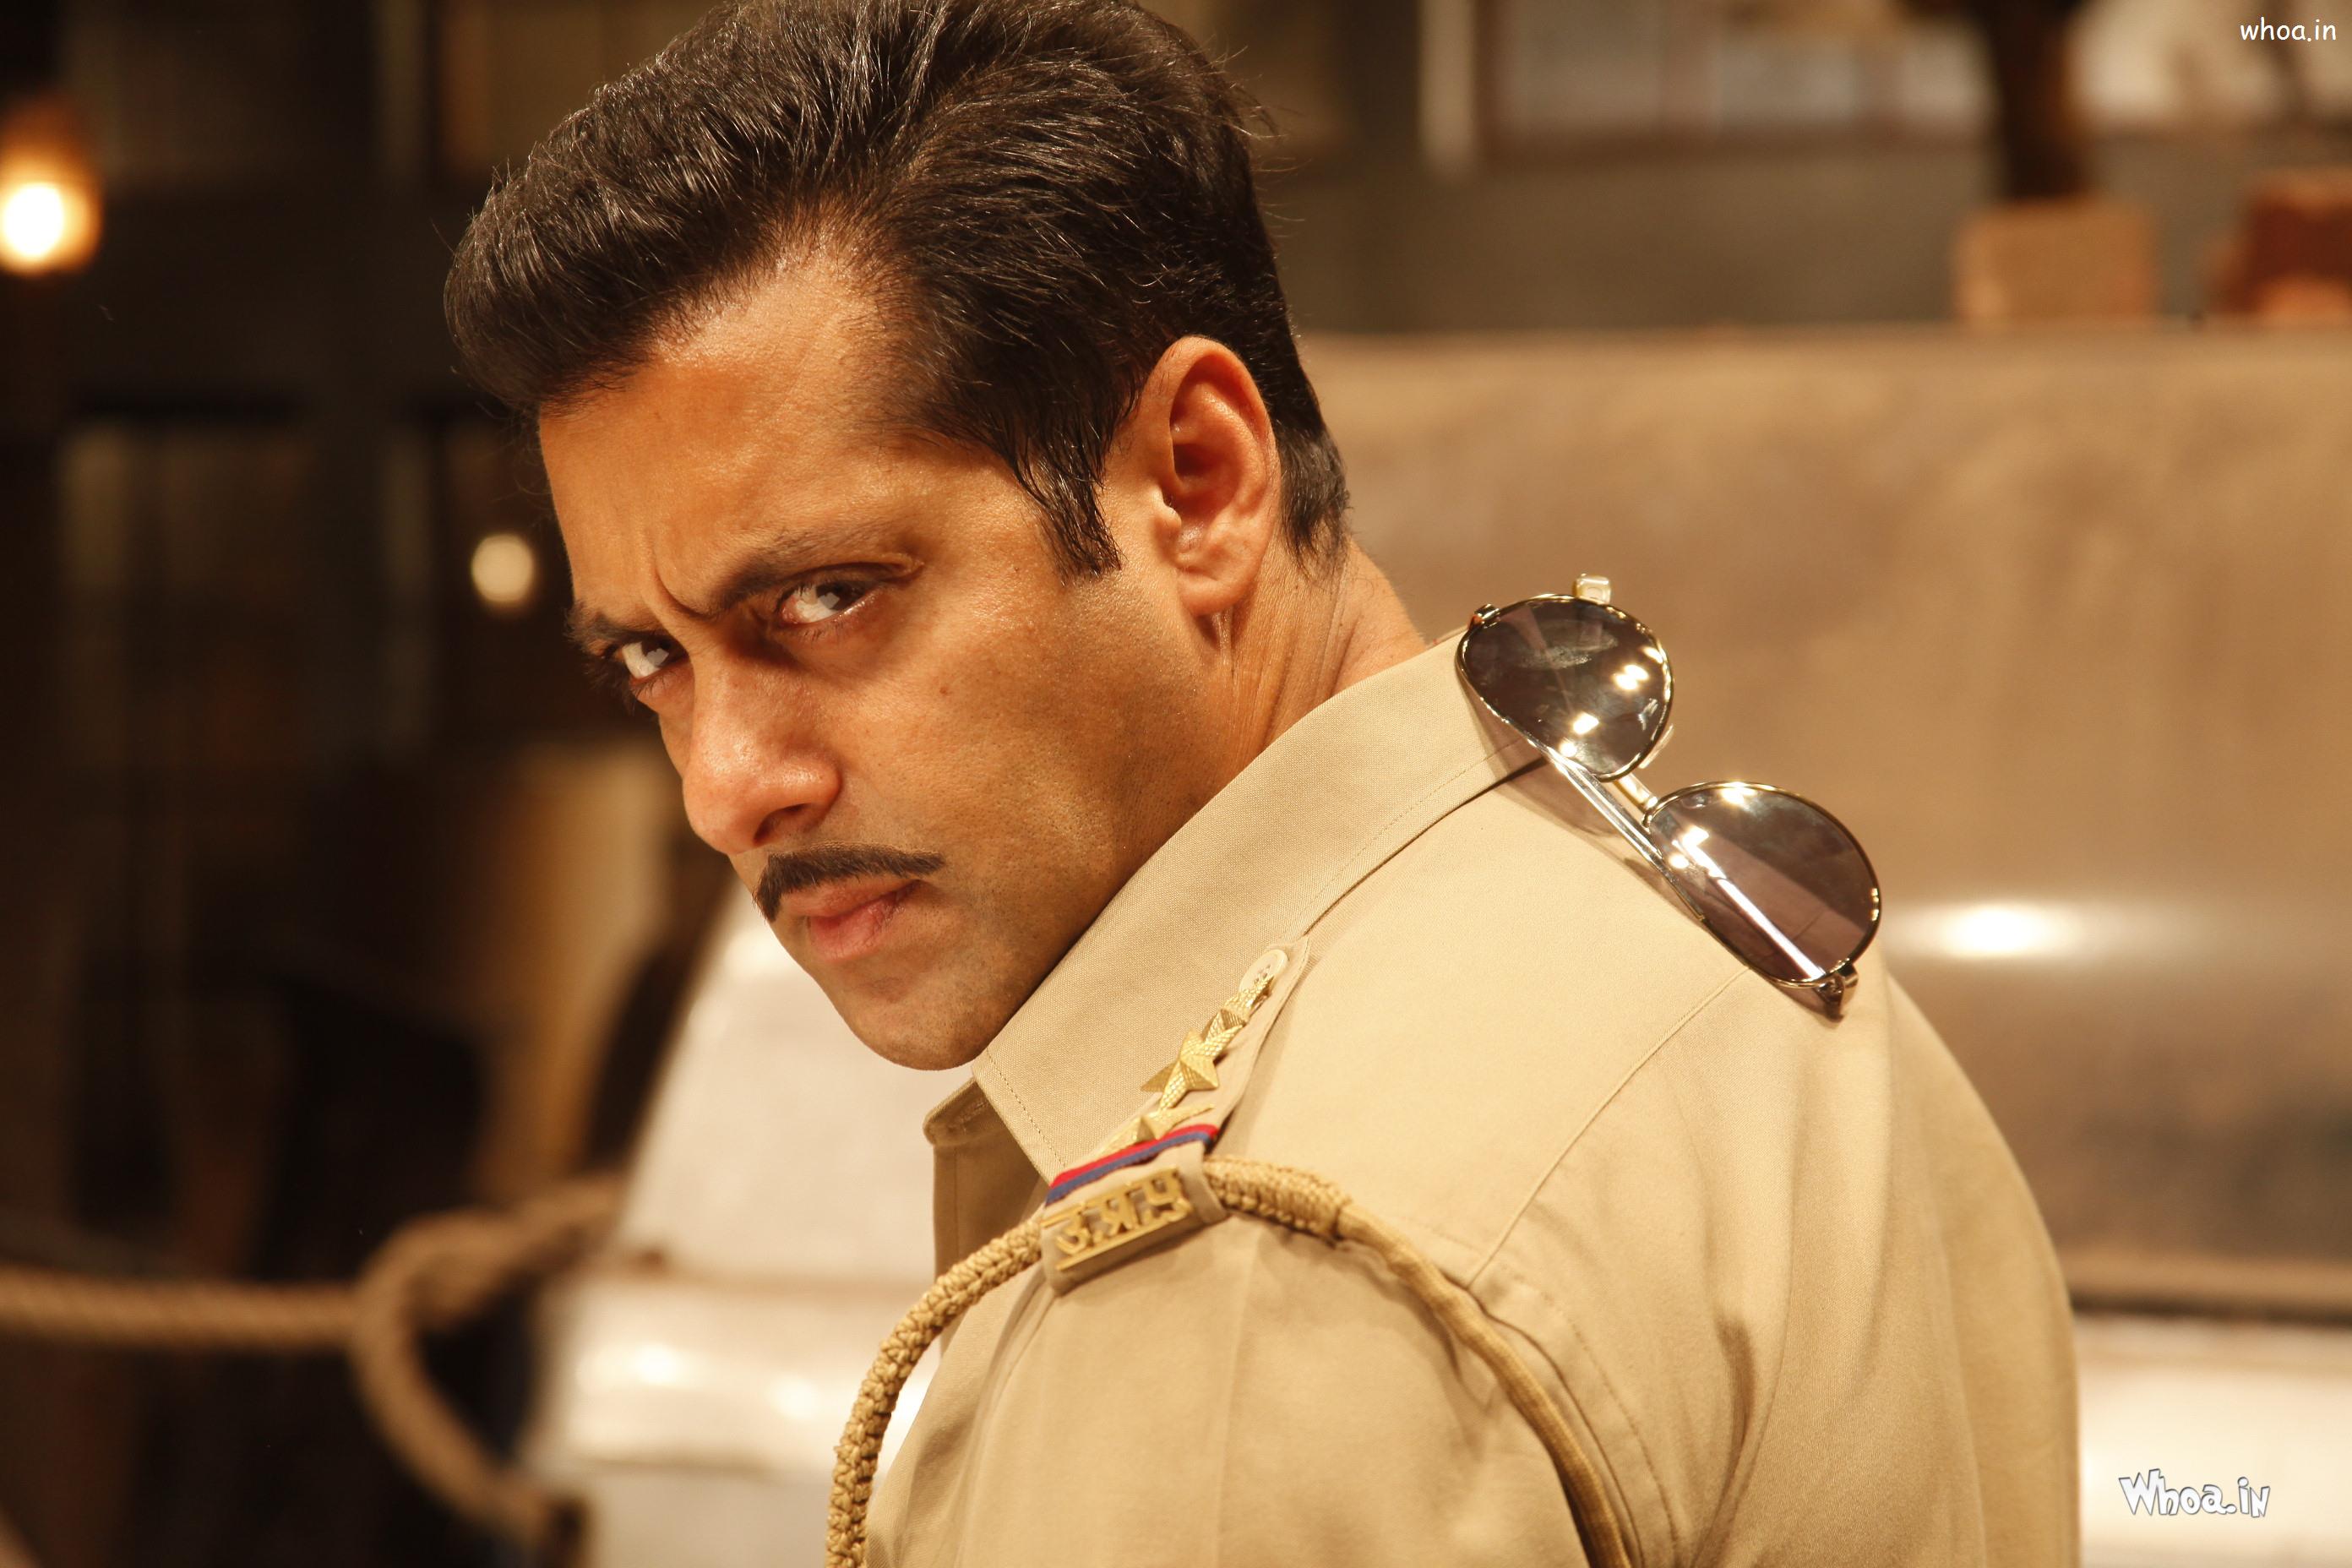 salman khan to feature in yet another cop drama